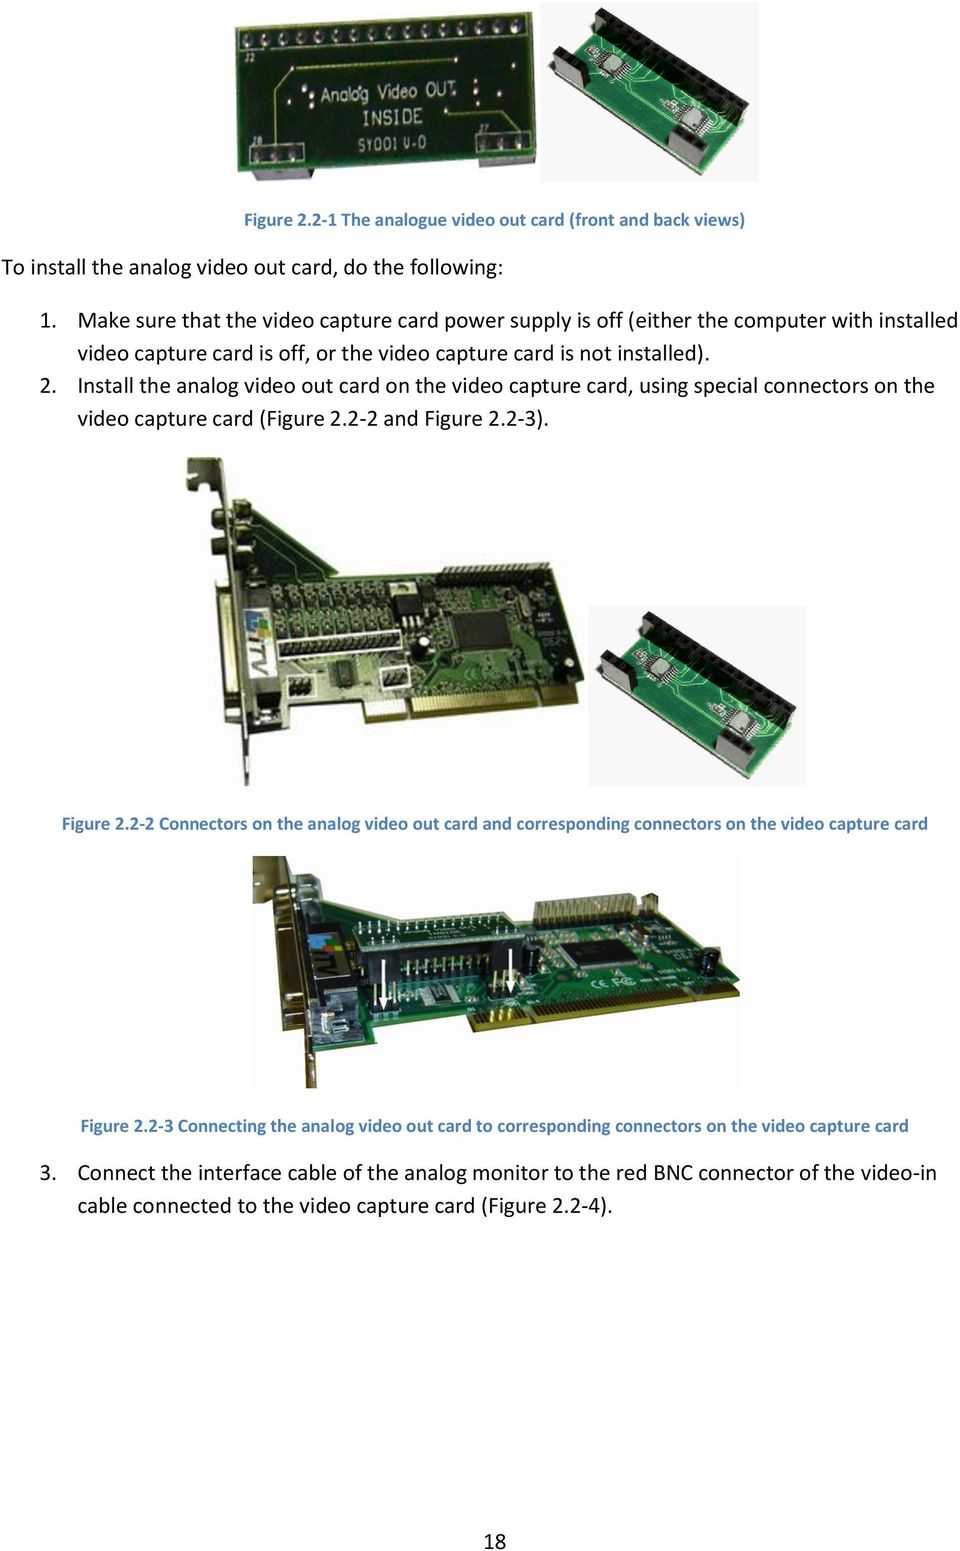 Install the analog video out card on the video capture card, using special connectors on the video capture card (Figure 2.2-2 and Figure 2.